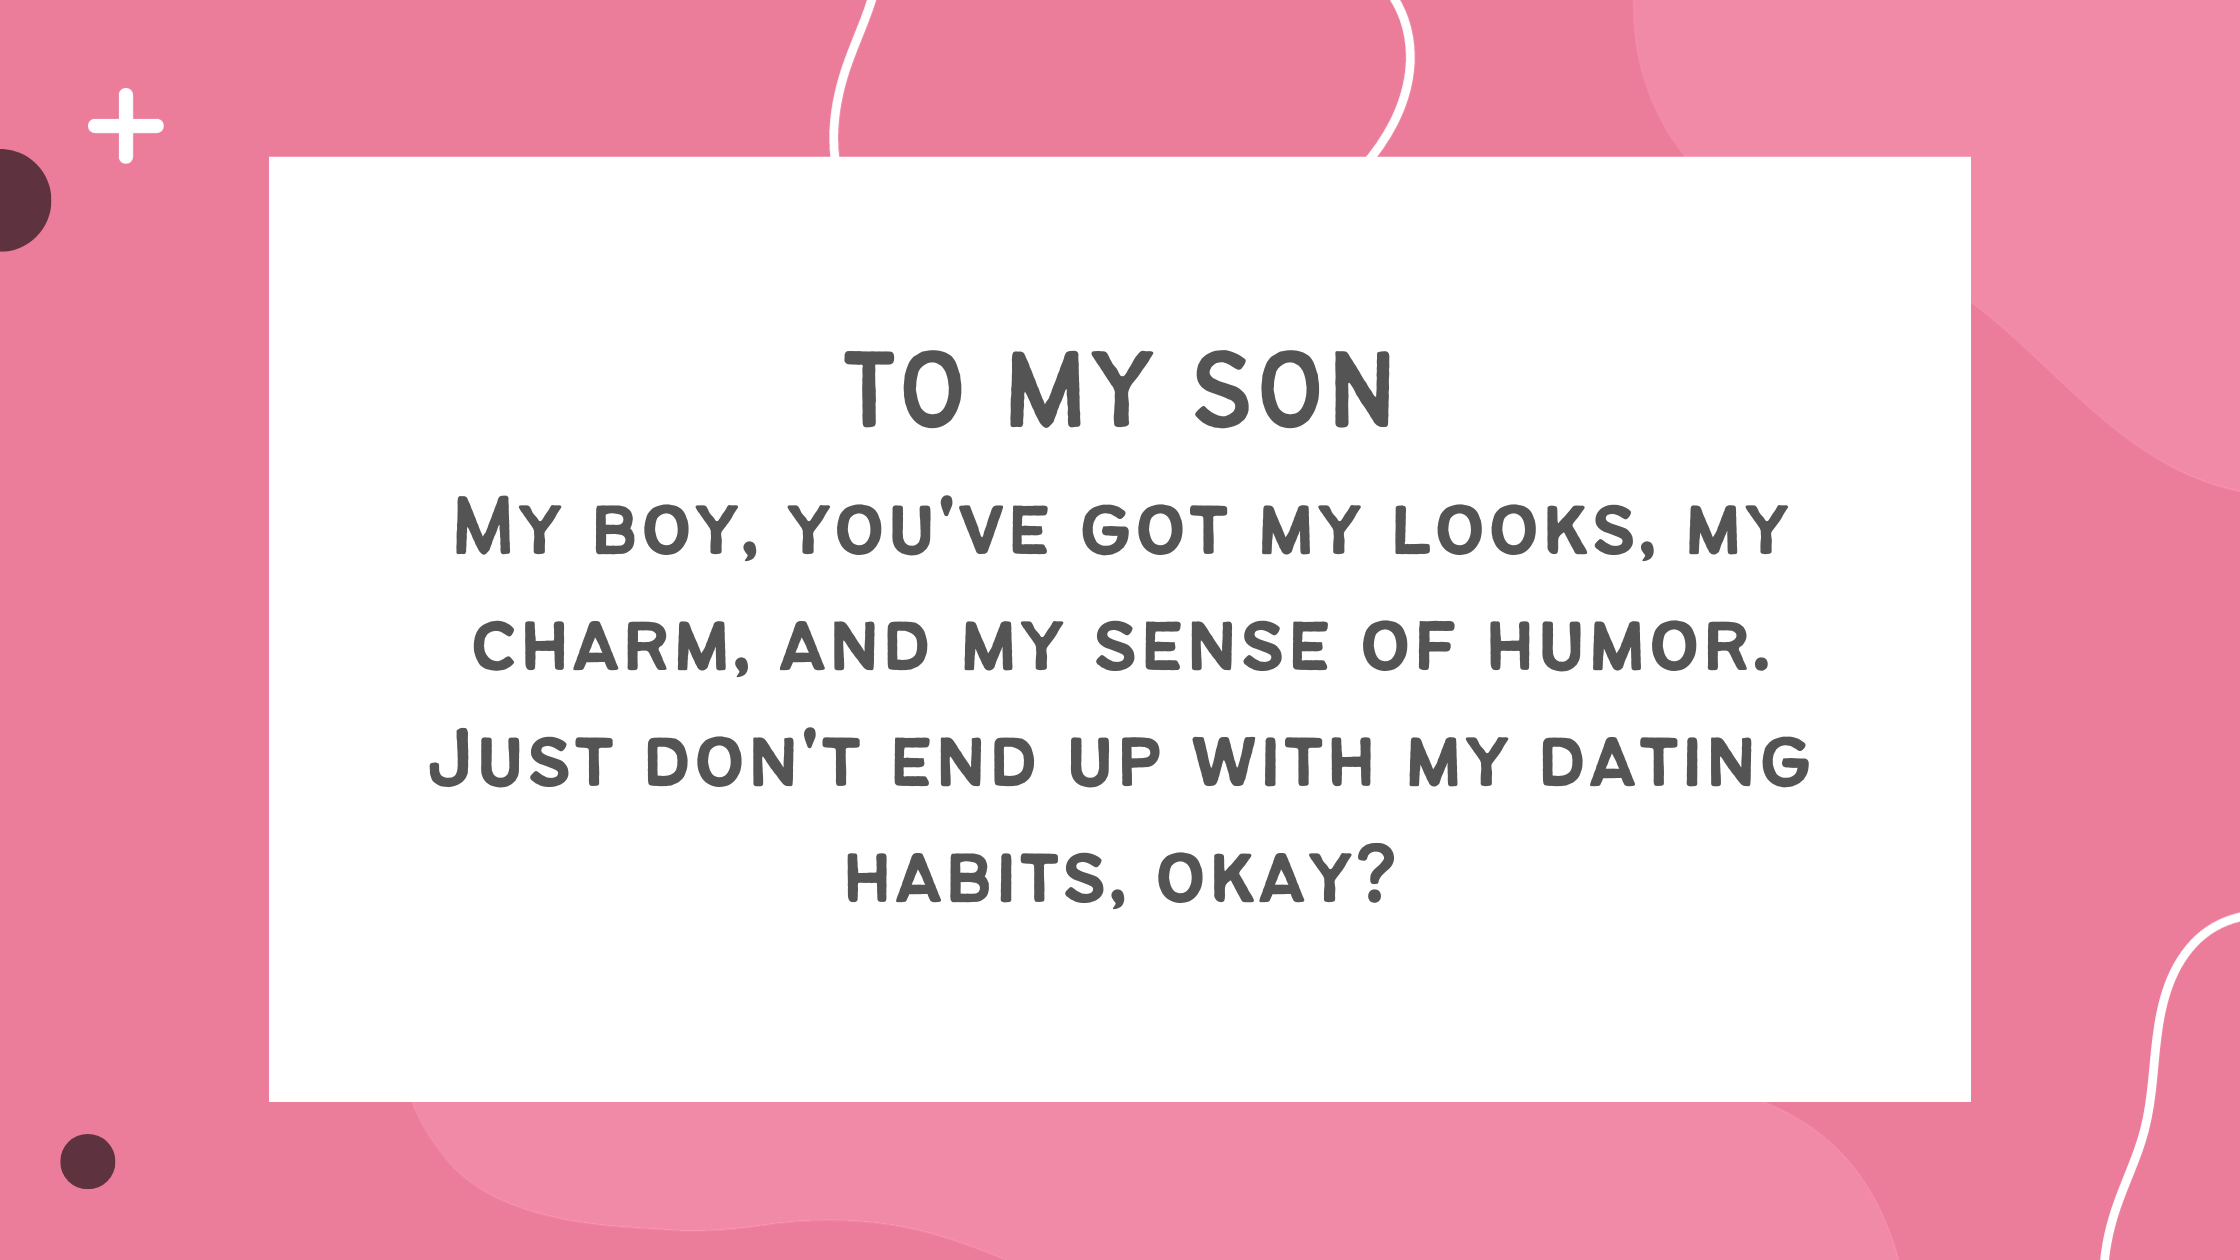 10 Heartwarming and Hilarious Quotes From a Dad to His Son